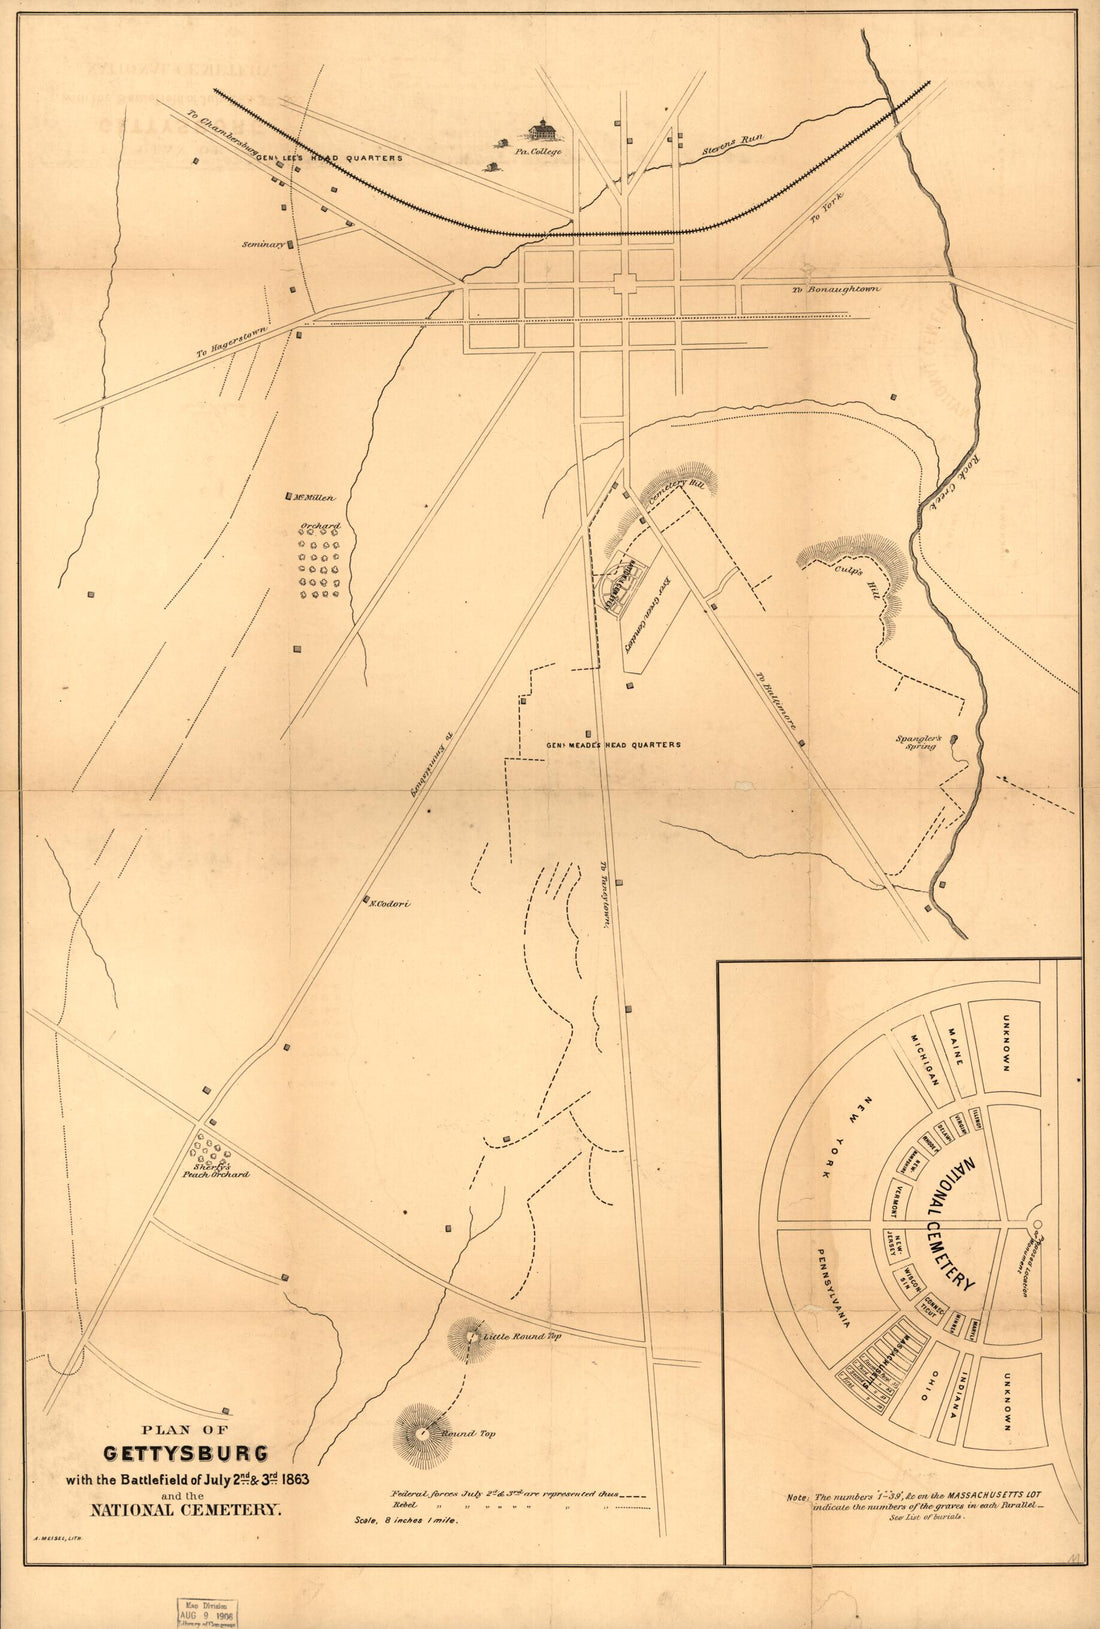 This old map of Plan of Gettysburg With the Battlefield of July 2nd &amp; 3rd, 1863 and the National Cemetery from 1800 was created by Augustus Meisel in 1800